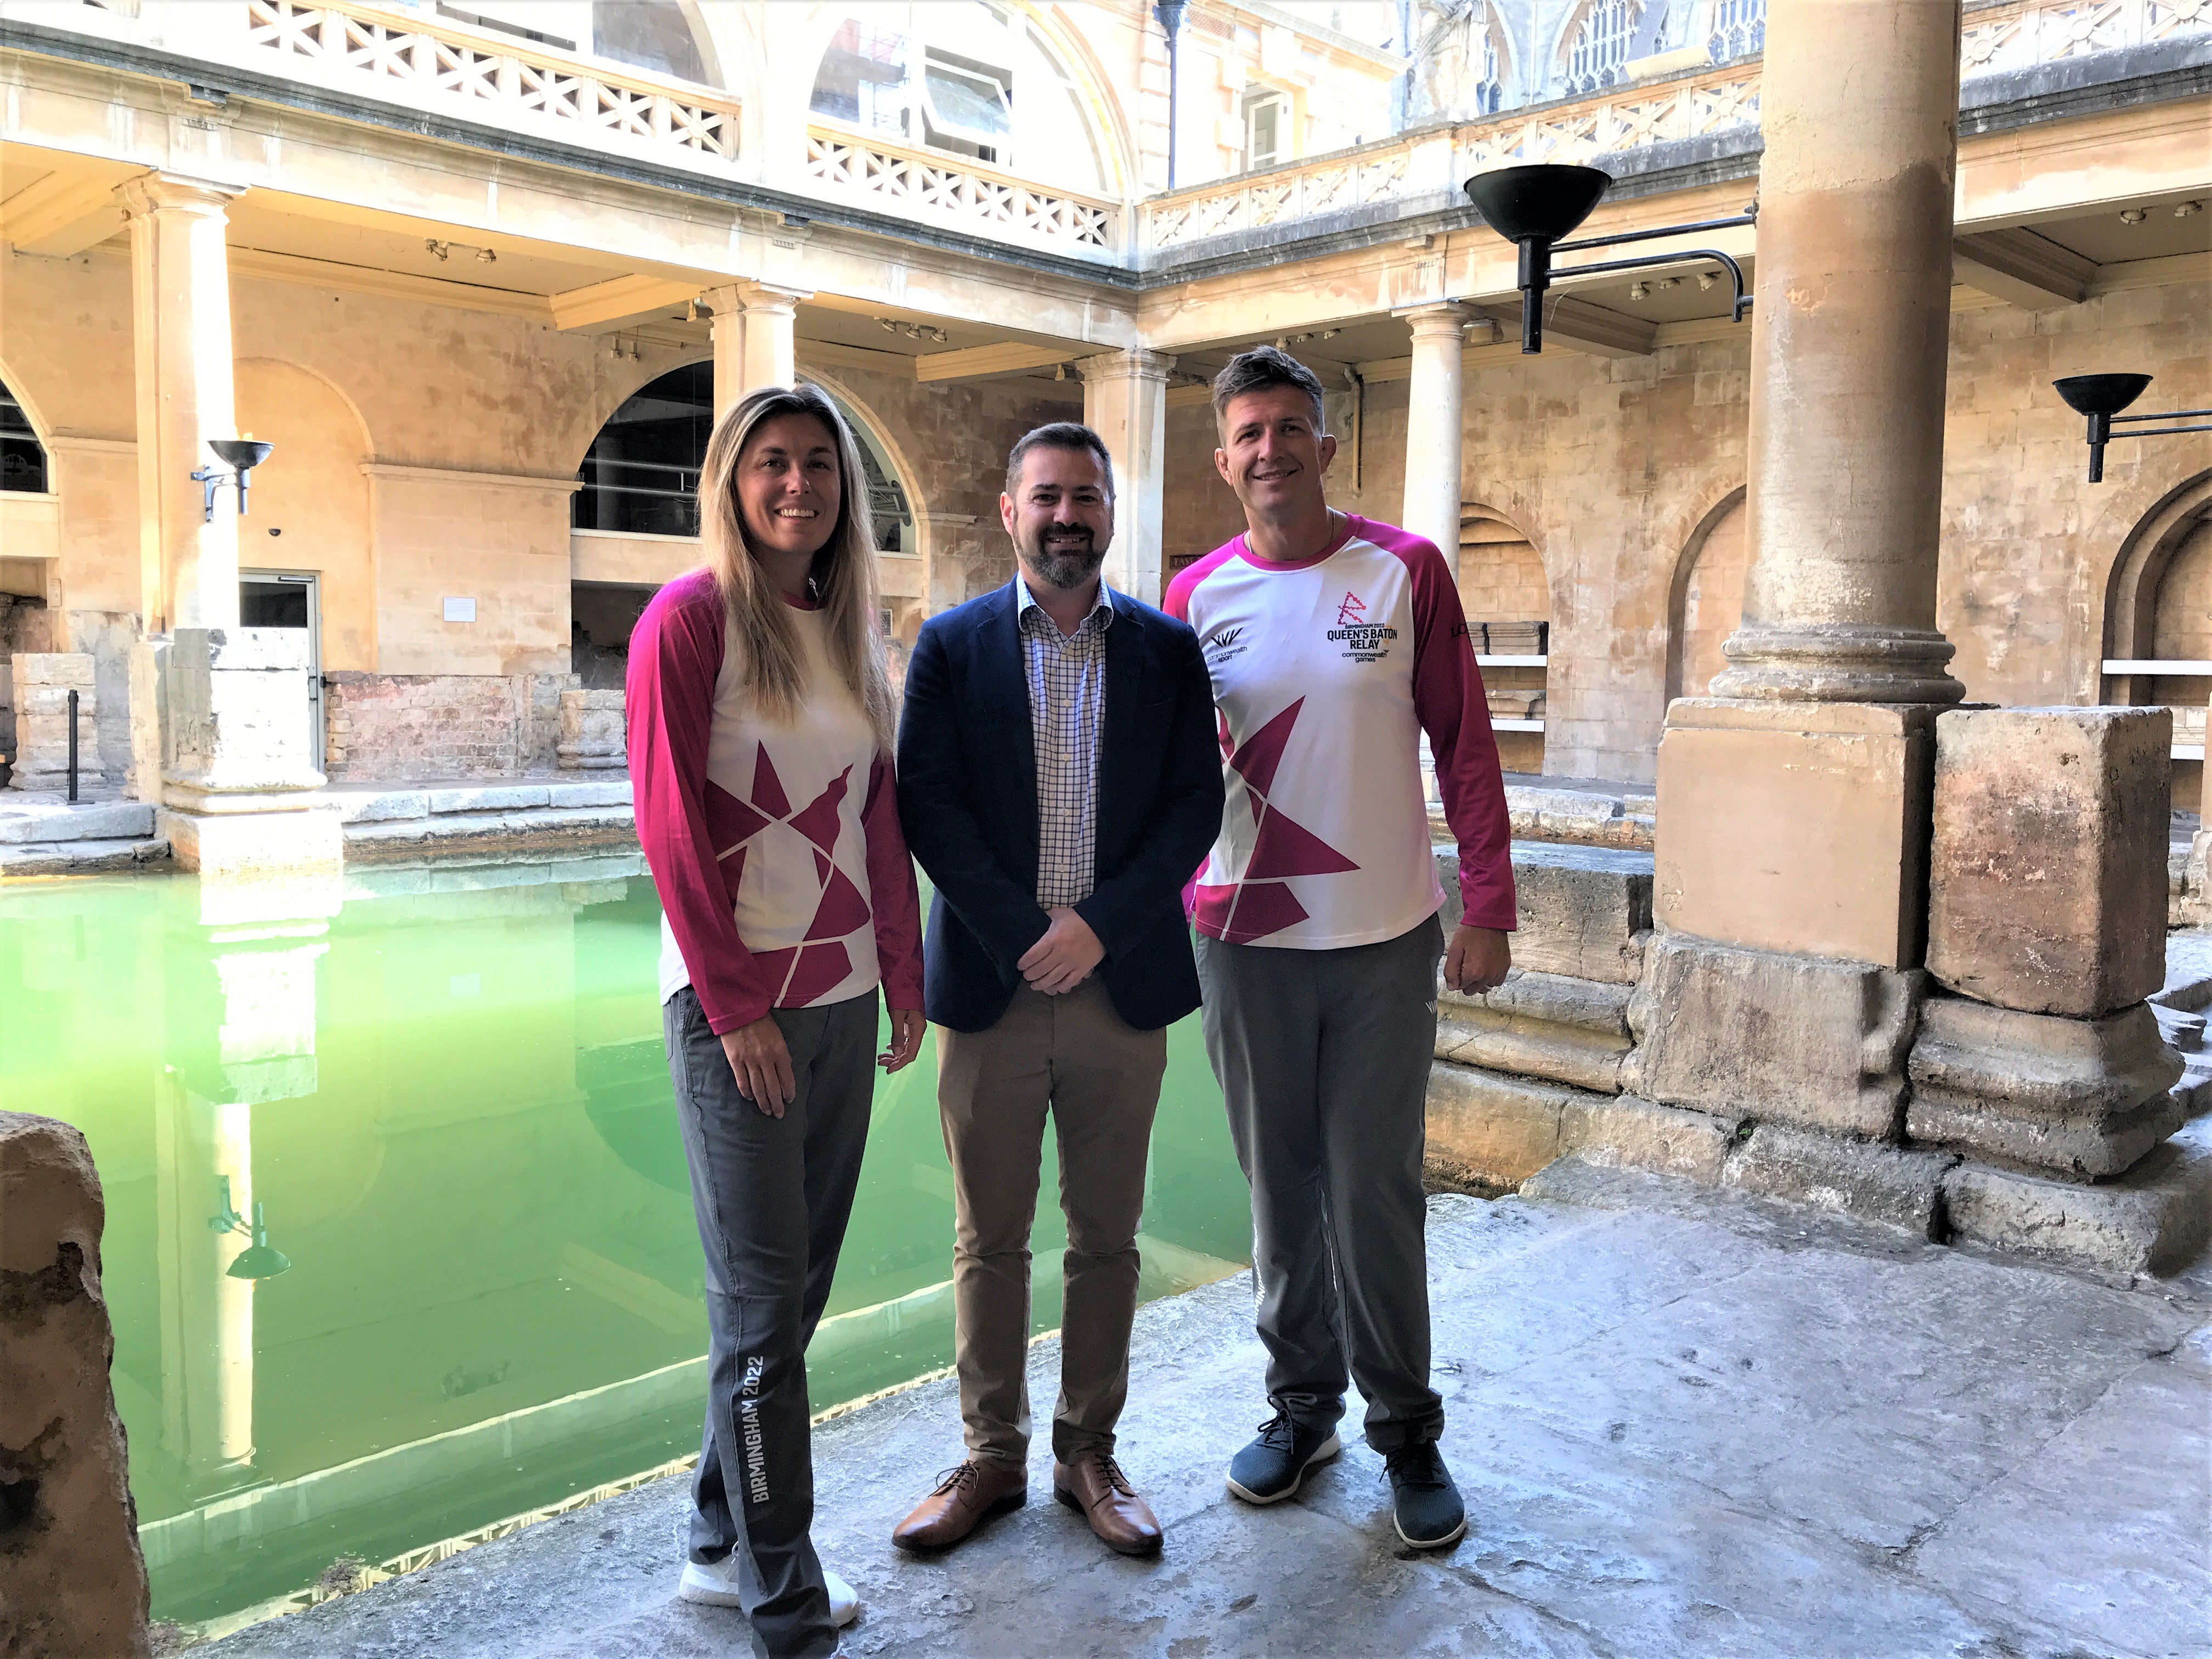 Batonbearers Lois and Ed Jackson with Councillor Kevin Guy by the Great Bath at the Roman Baths